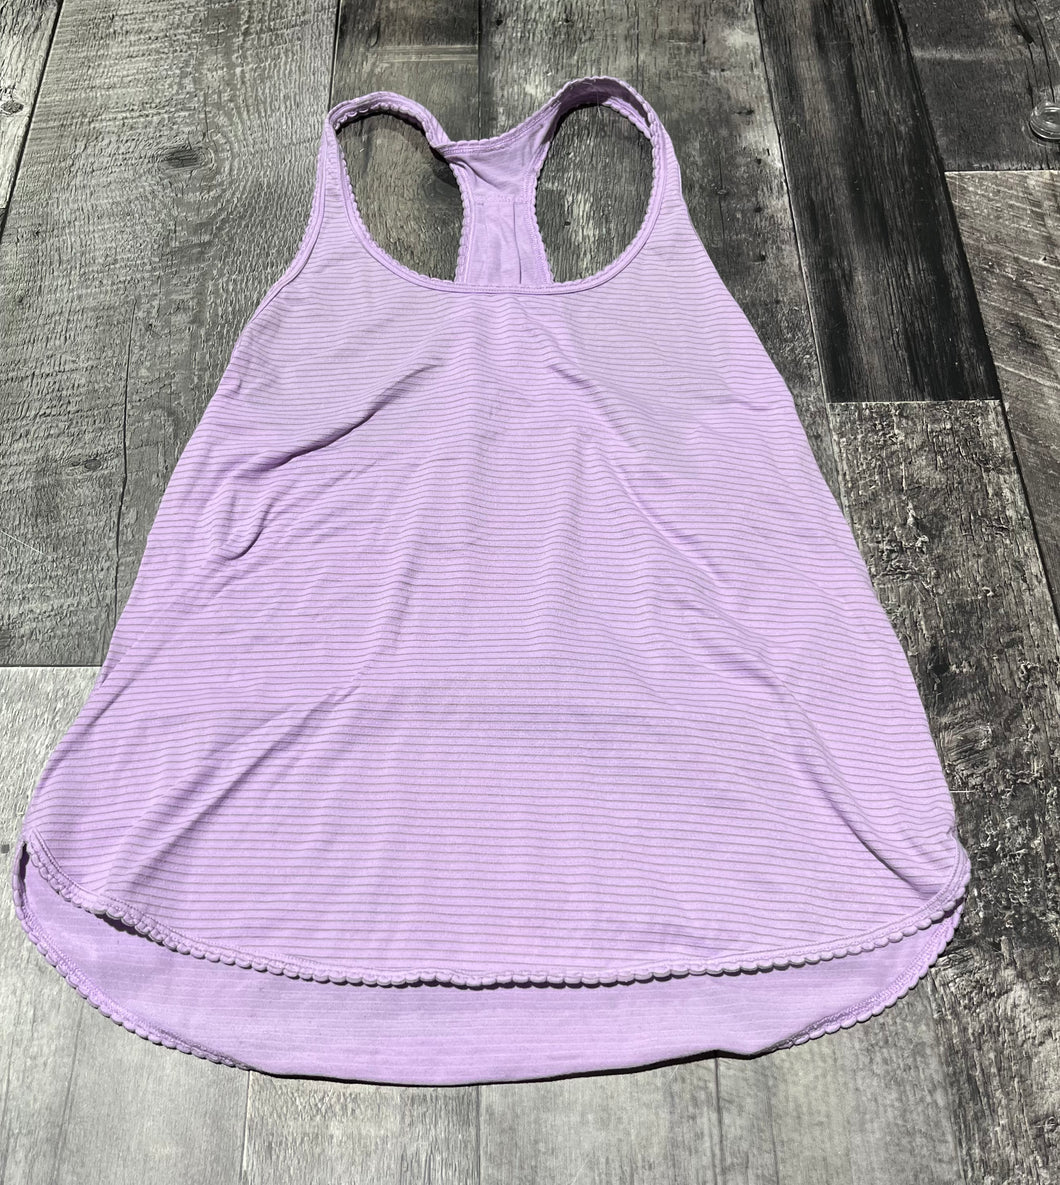 lululemon lavender tank top - Hers size approx S